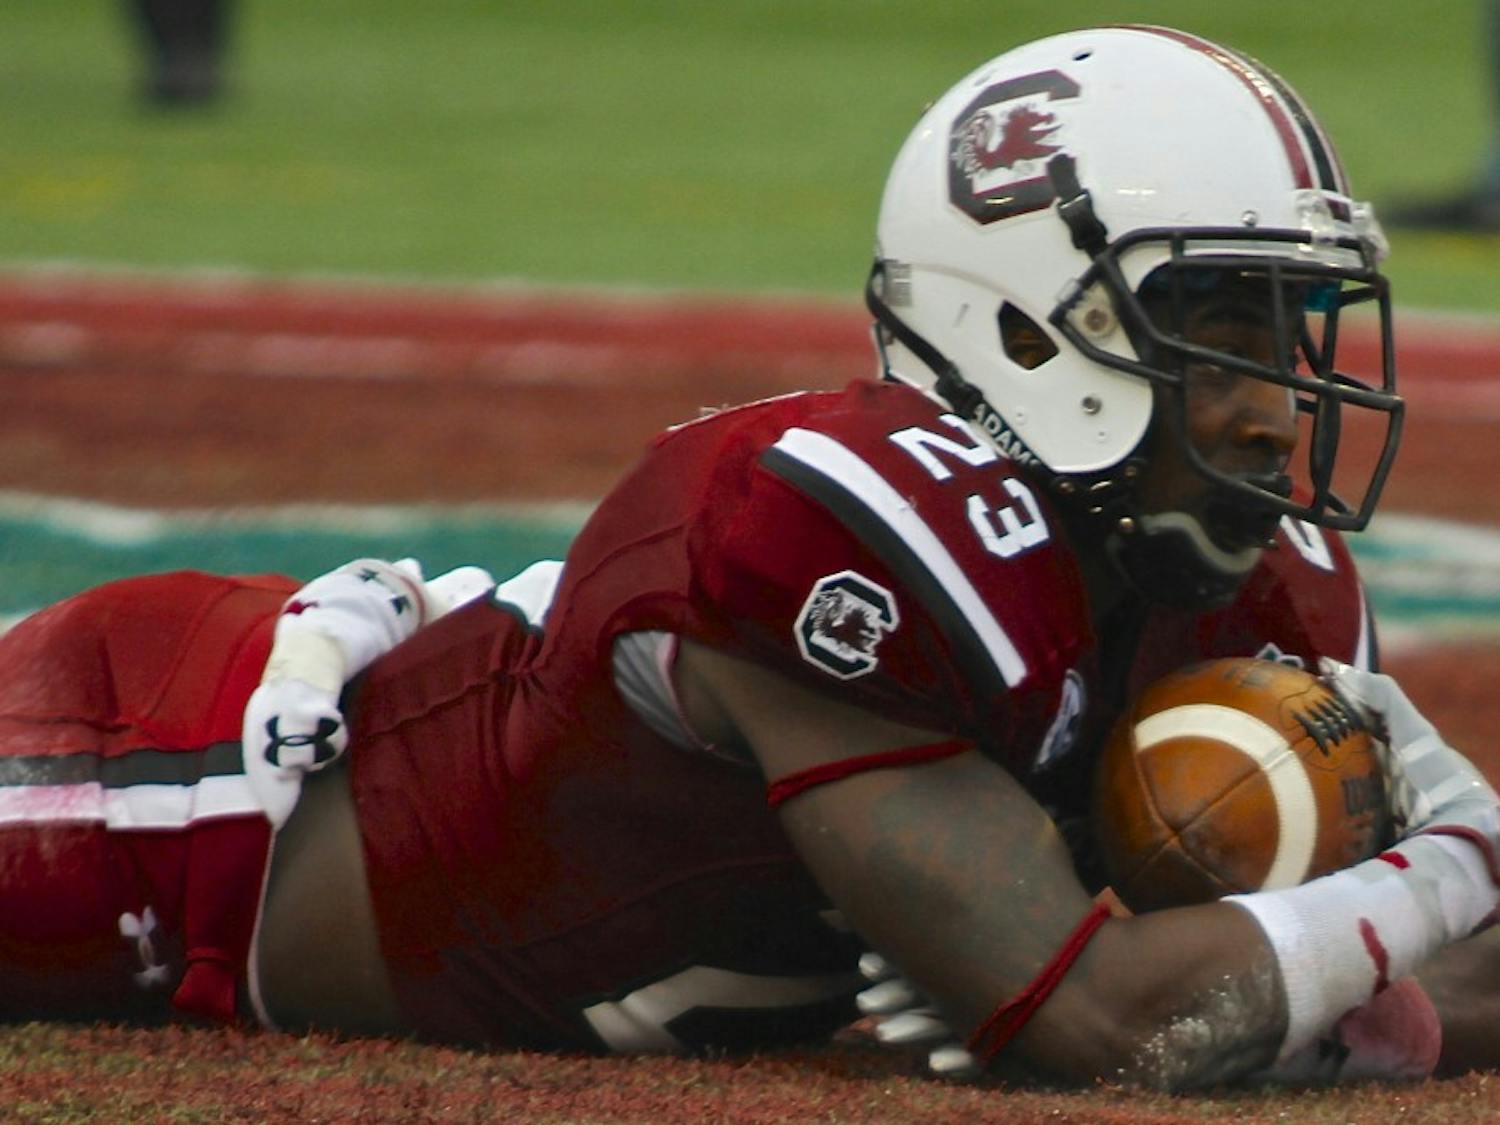 	Junior wide receiver Bruce Ellington clutches one of his two touchdowns on the day, propelling South Carolina to a 34-24 victory over Wisconsin in the 2014 Capital One Bowl.